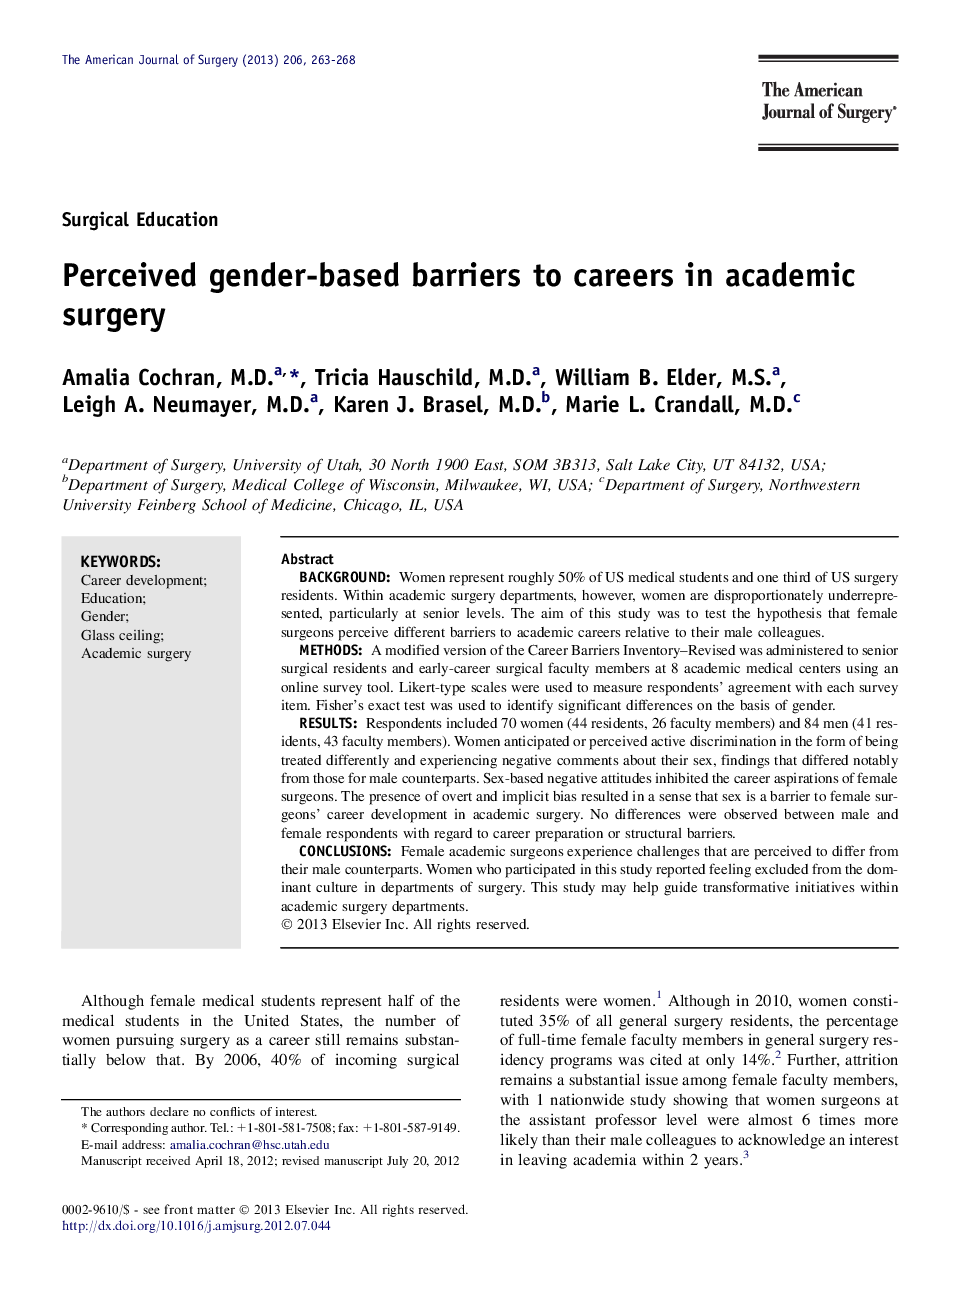 Perceived gender-based barriers to careers in academic surgery 